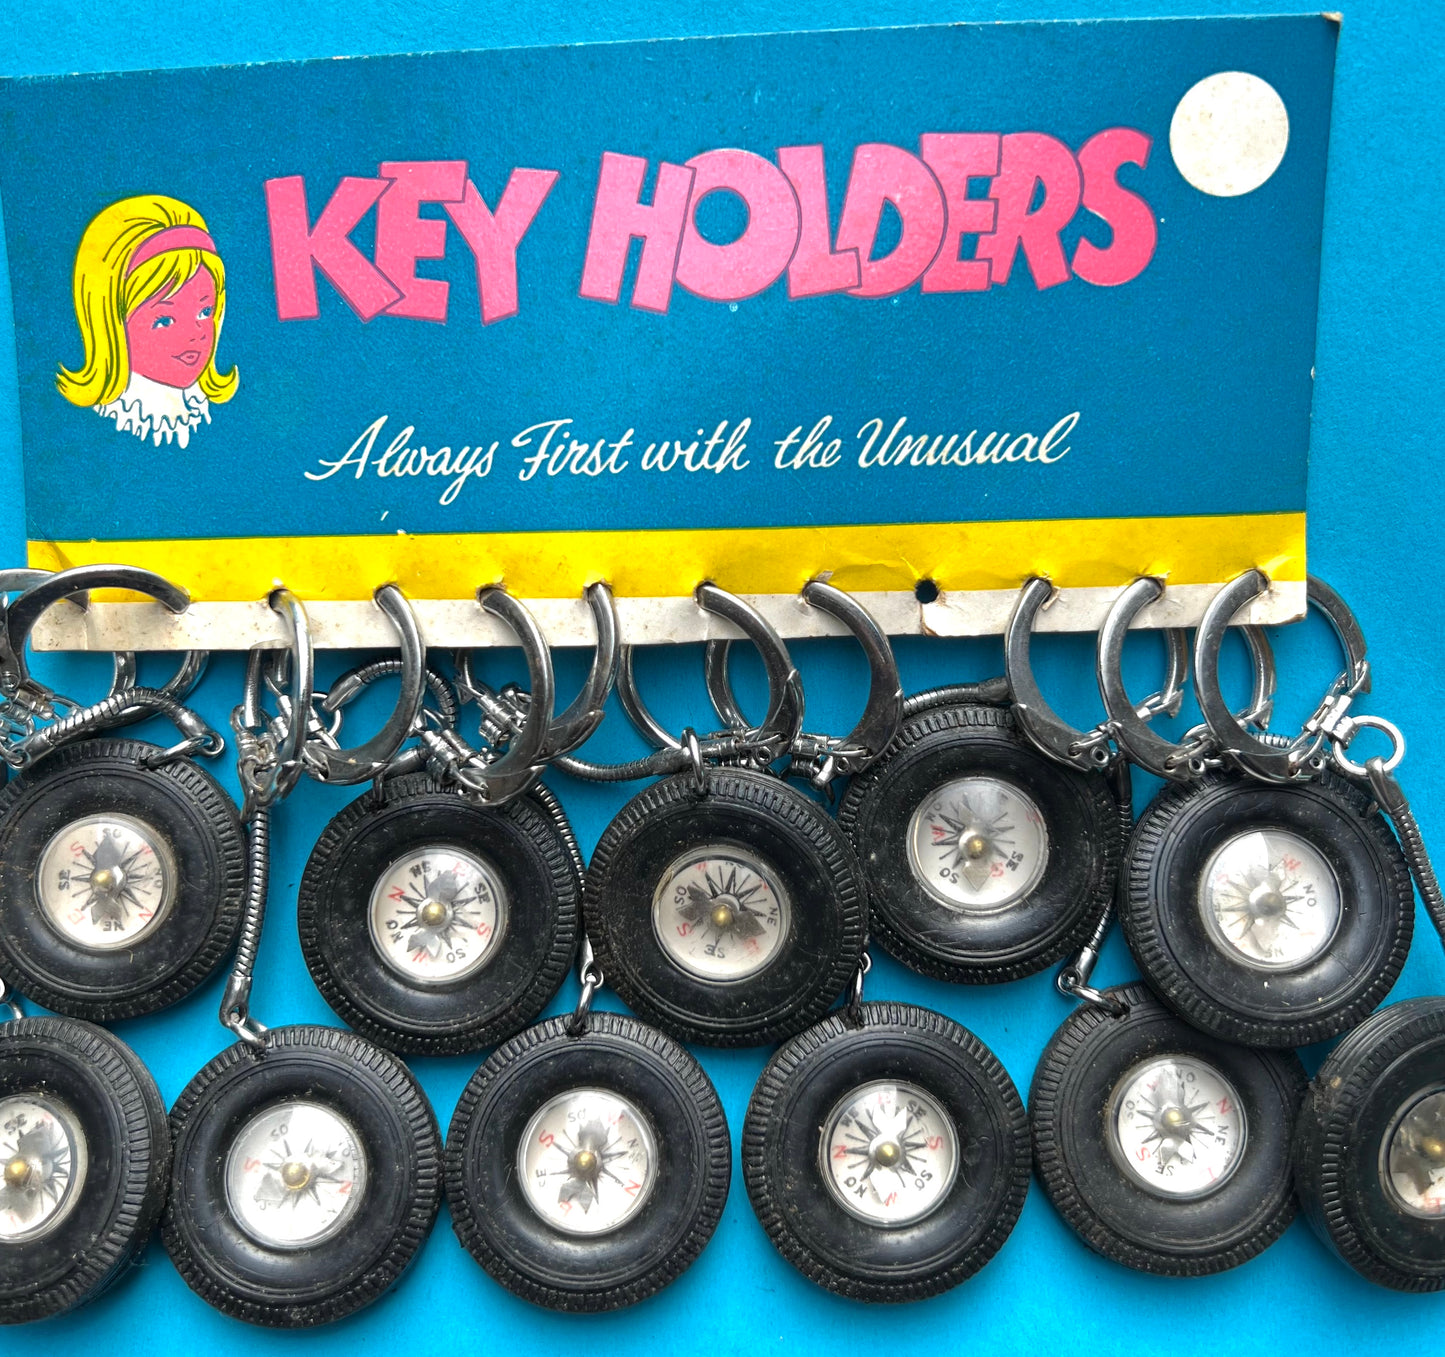 Compases, within Tyres, that are Key Rings...